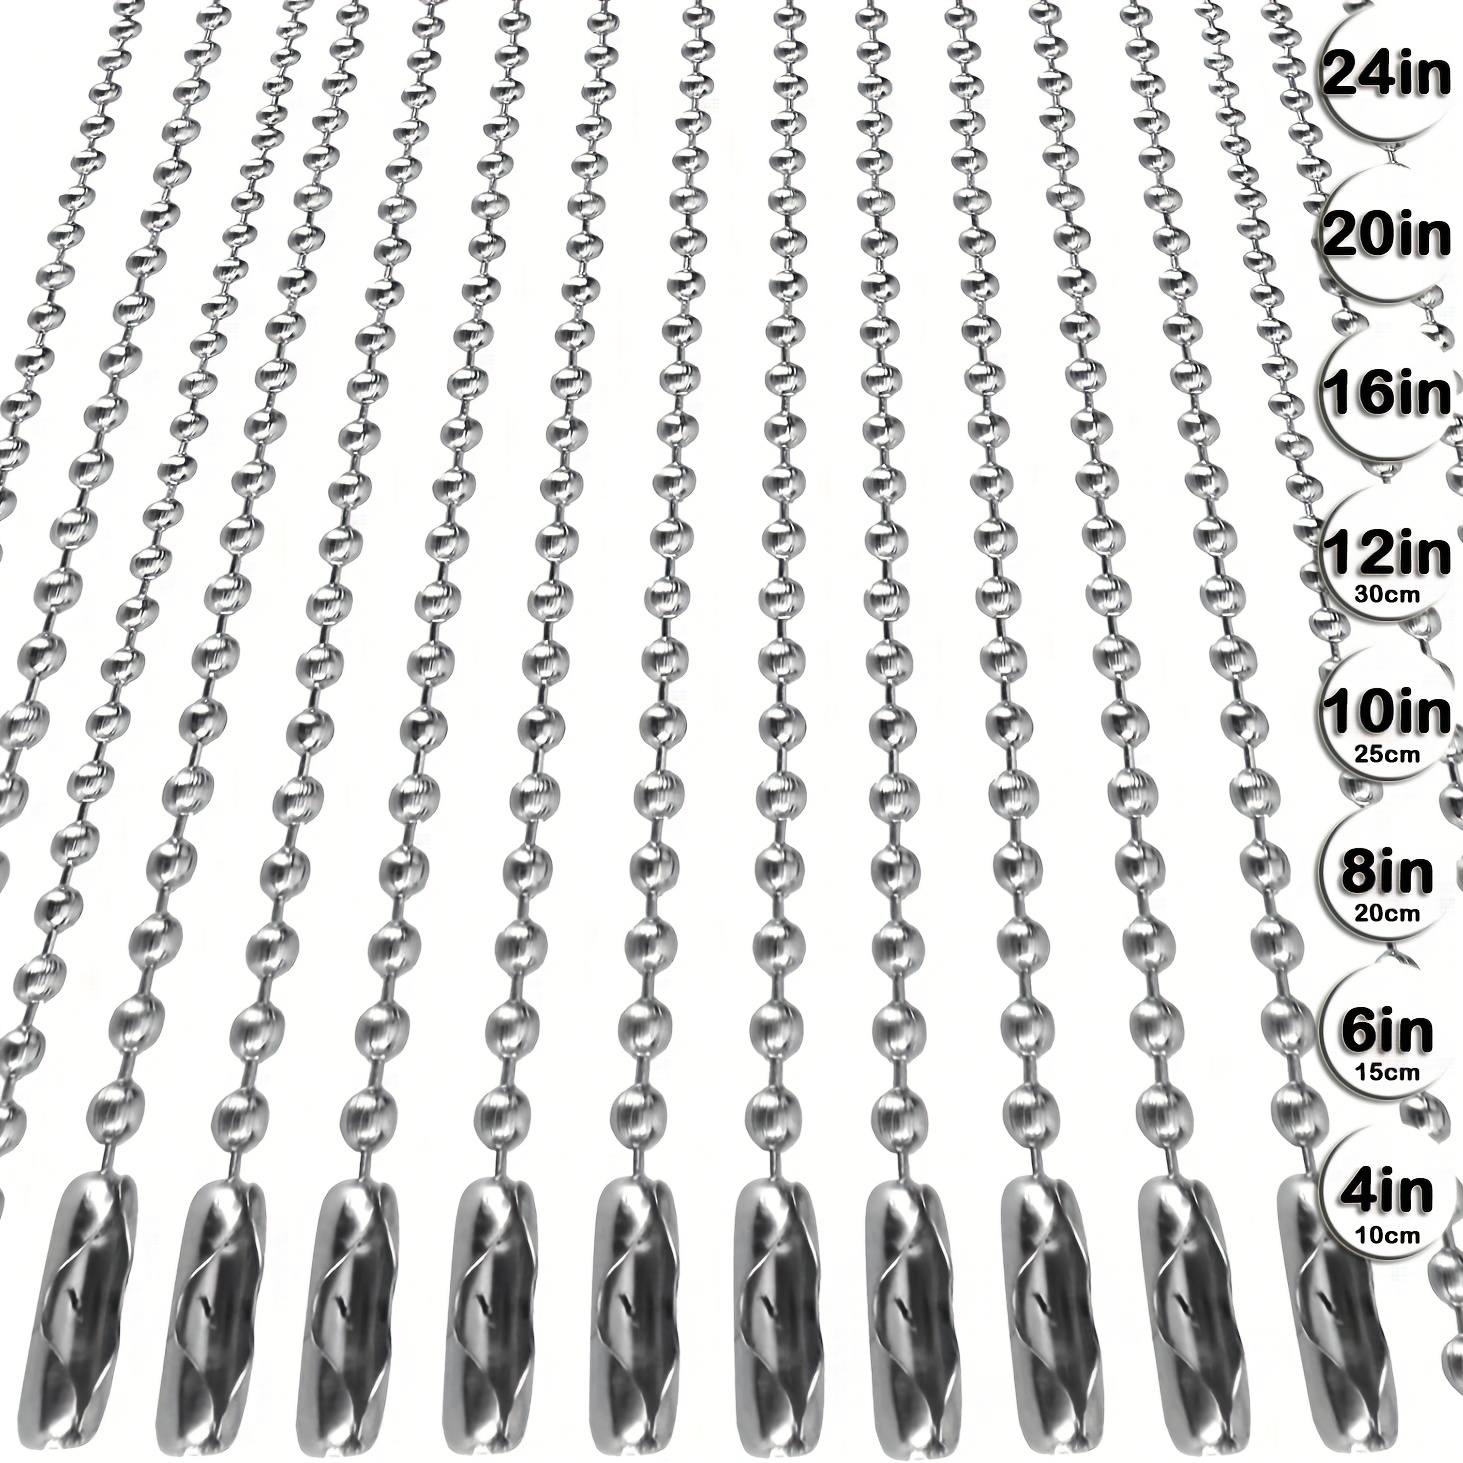 20pcs/lot 19 Colors 15cm Length 2.4mm Round Ball Chain Fit Key  Chain/Dolls/Label Hand Tag Connector DIY Necklace Jewelry Making